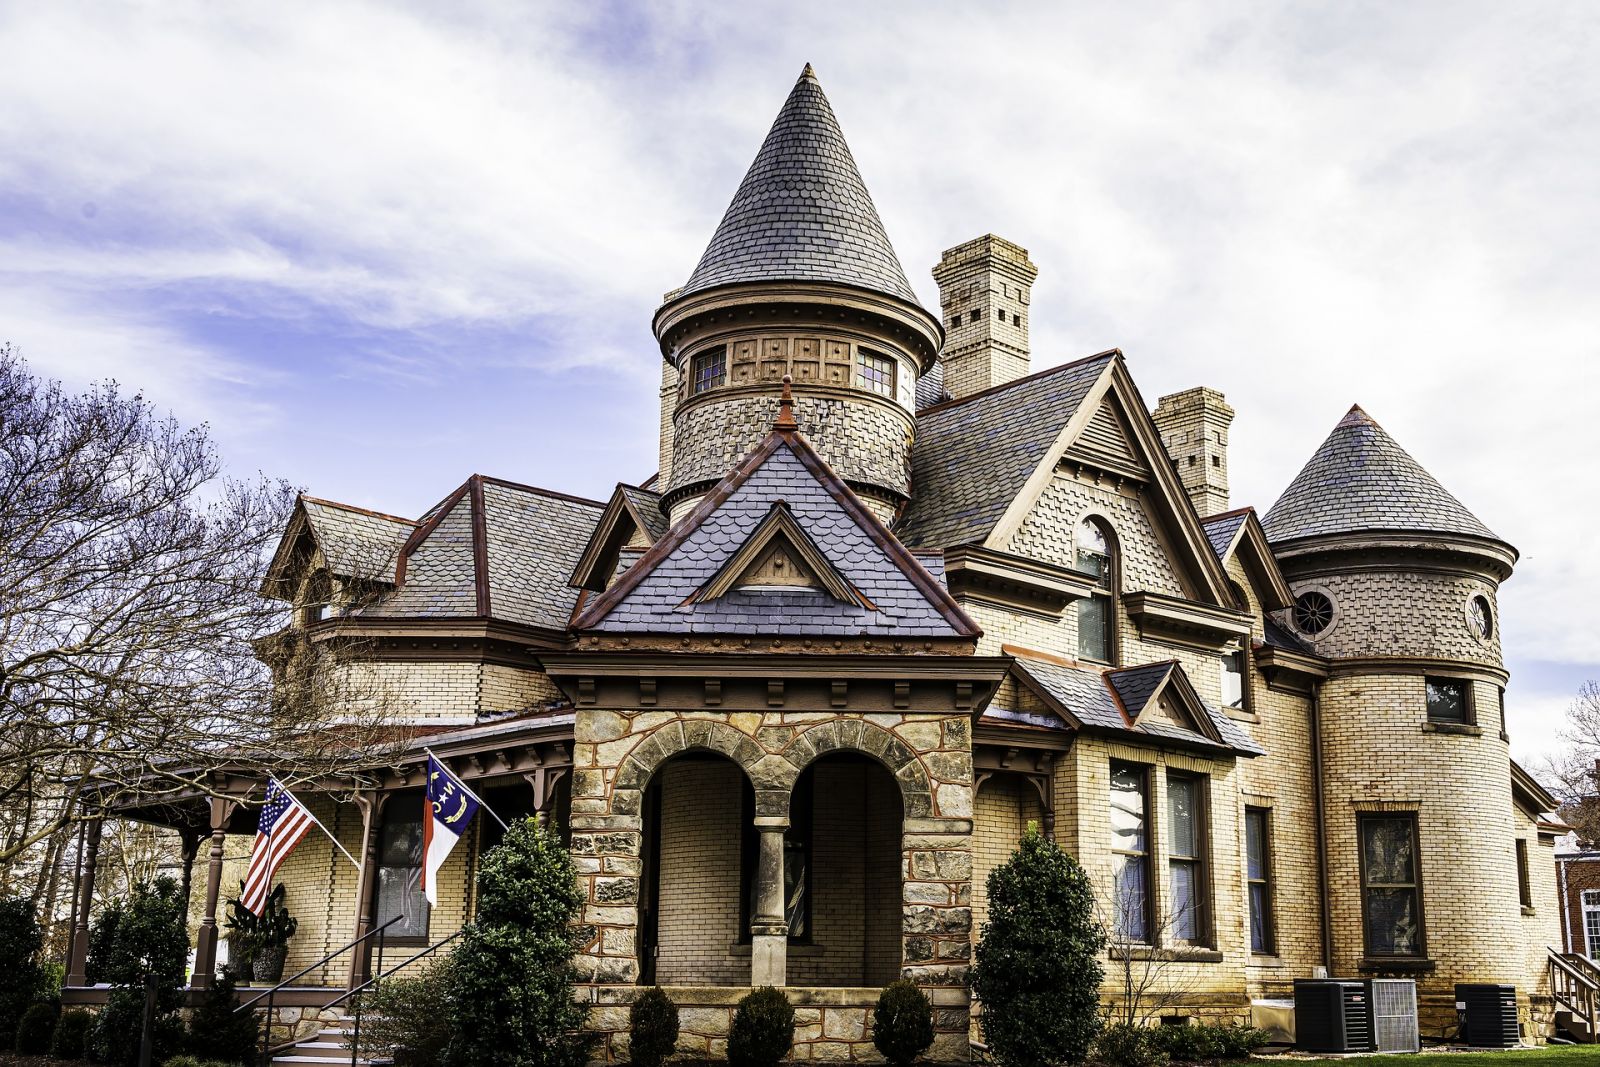 This Victorian features a variety of architectural elements including brick, stone, shingles, slate tiles, and turrets.